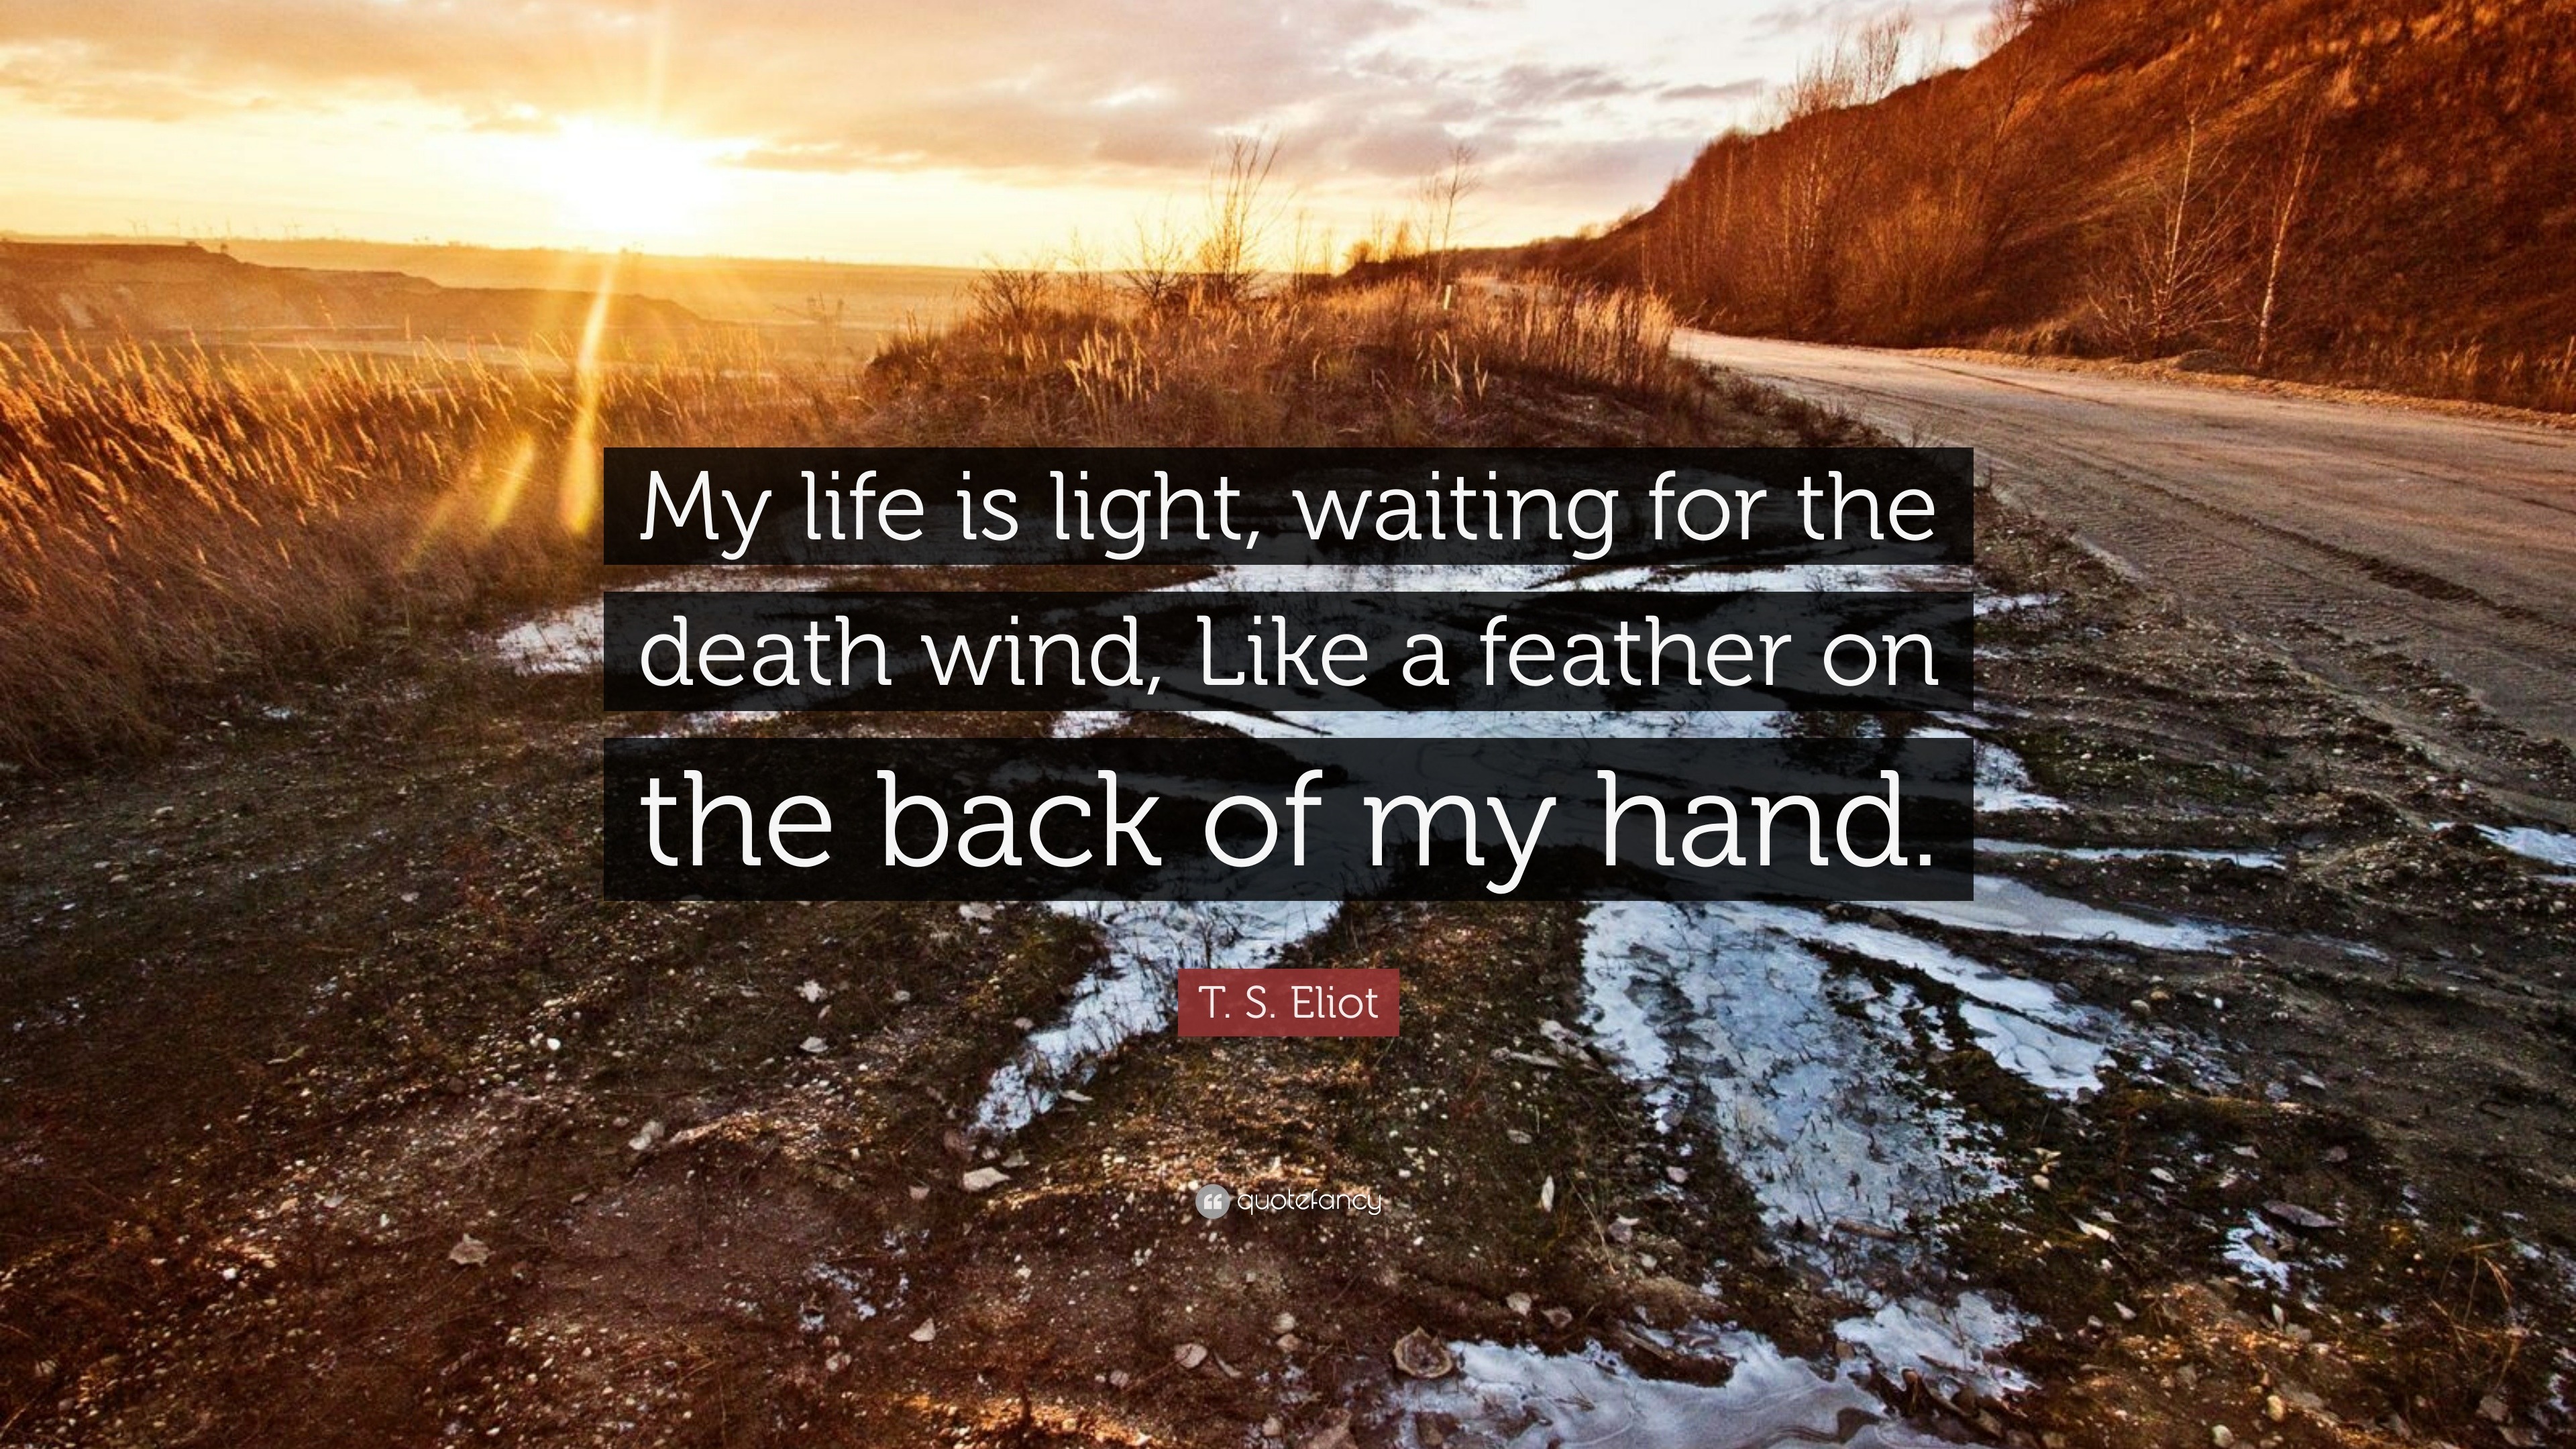 T S Eliot Quote “My life is light waiting for the wind